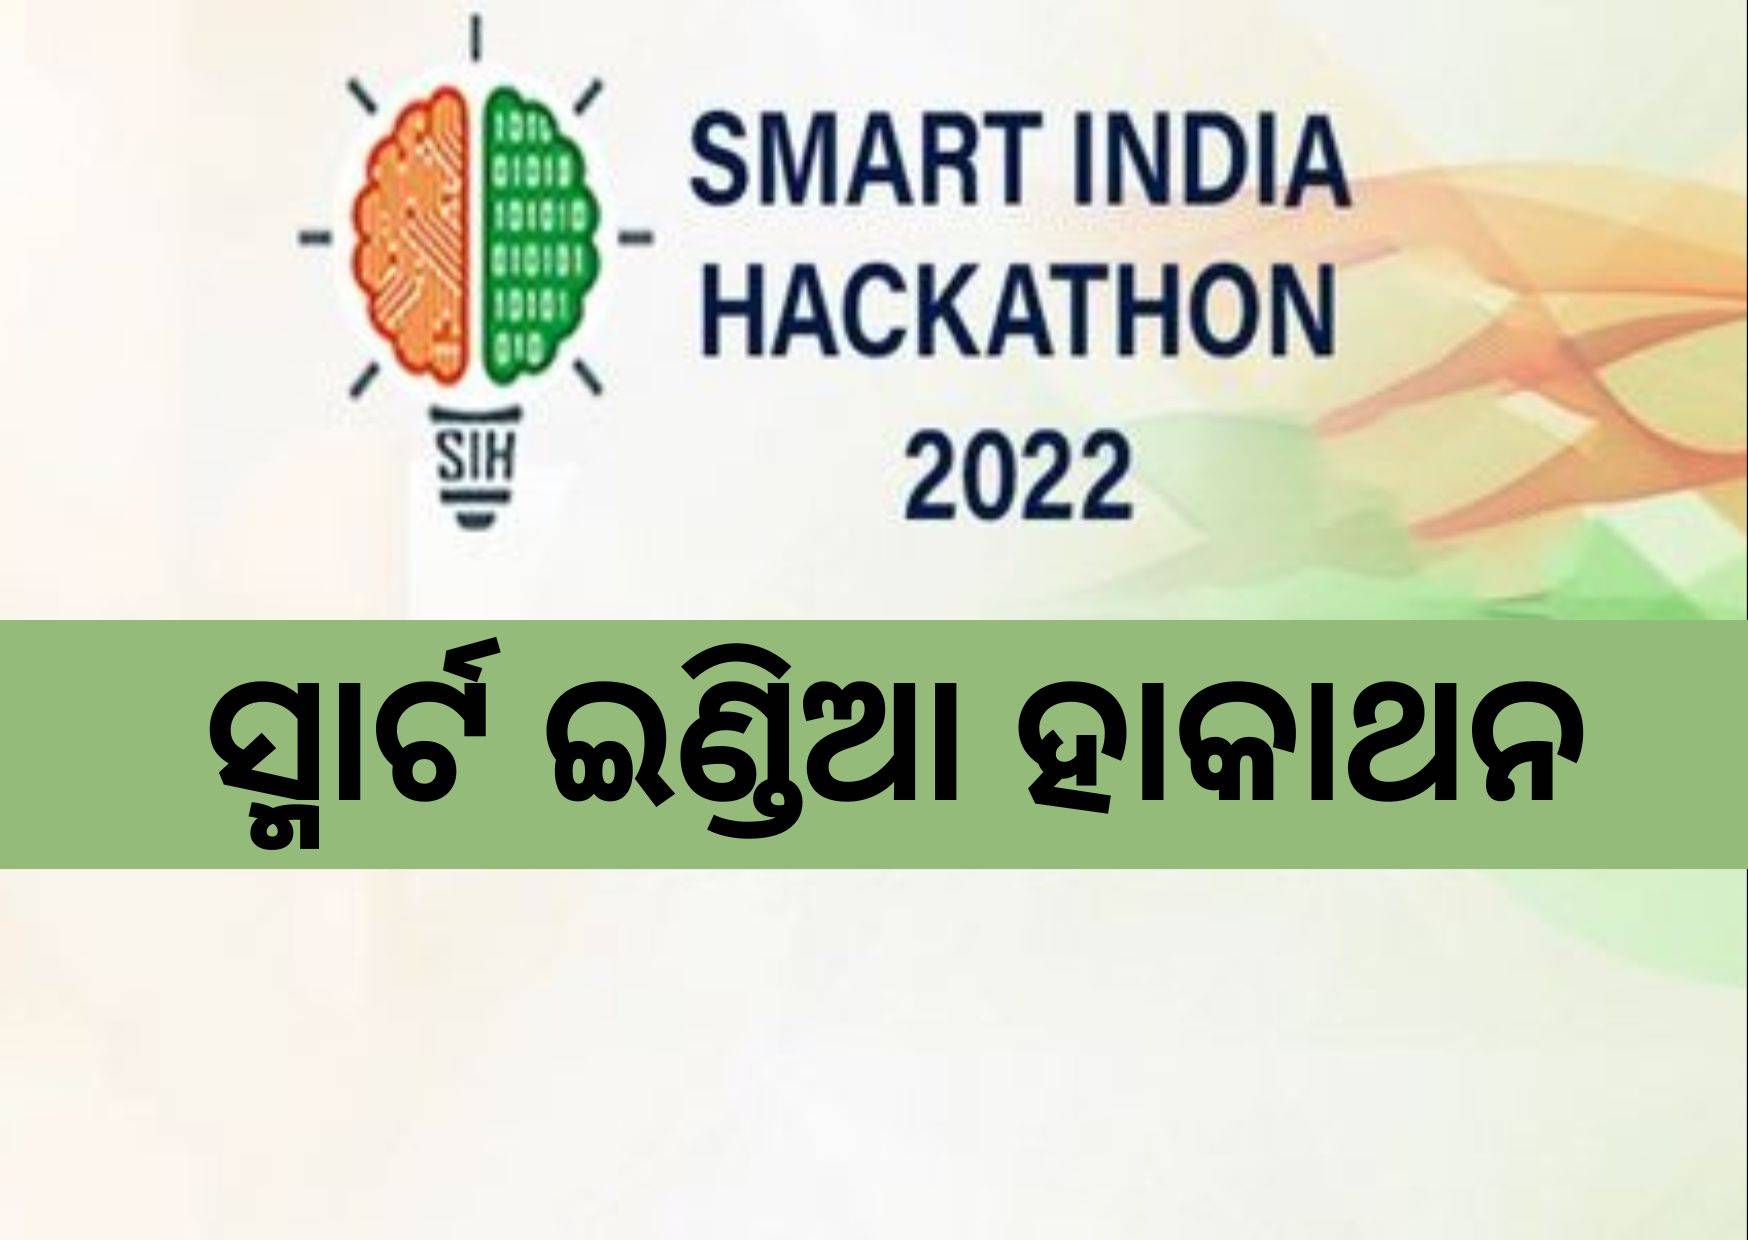 PM to address Grand Finale of Smart India Hackathon 2022 on 25th August